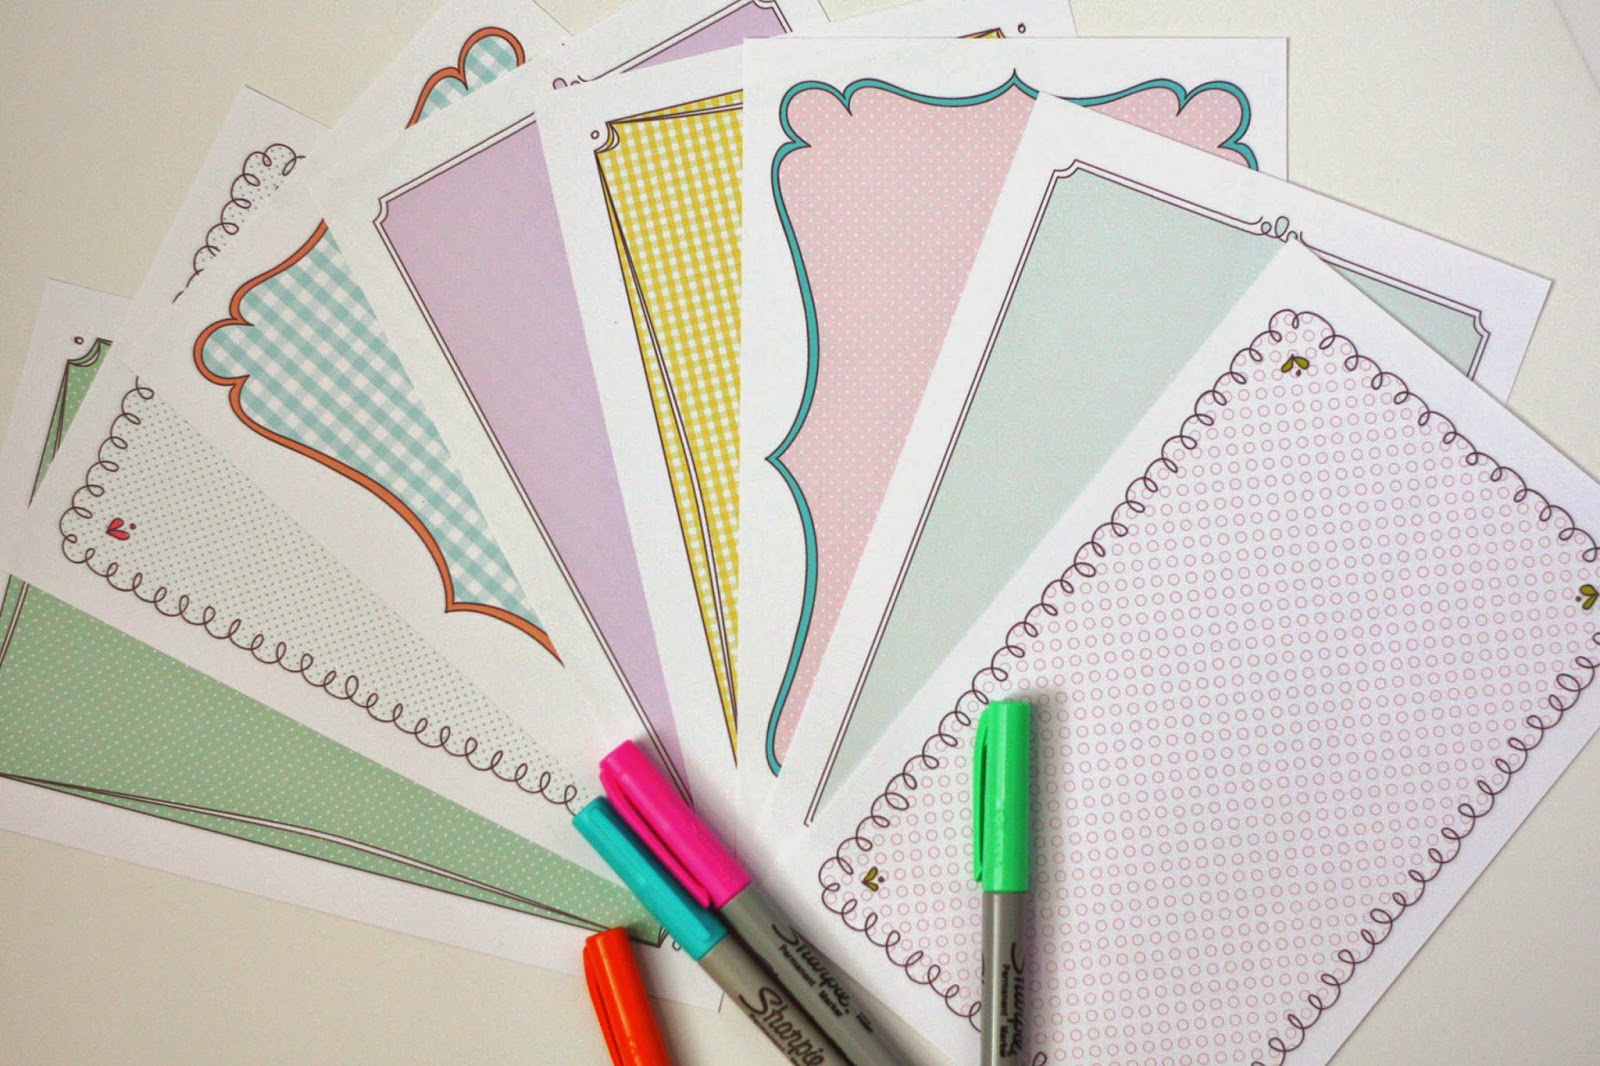 amy-j-delightful-blog-free-printable-stationery-sheets-with-happy